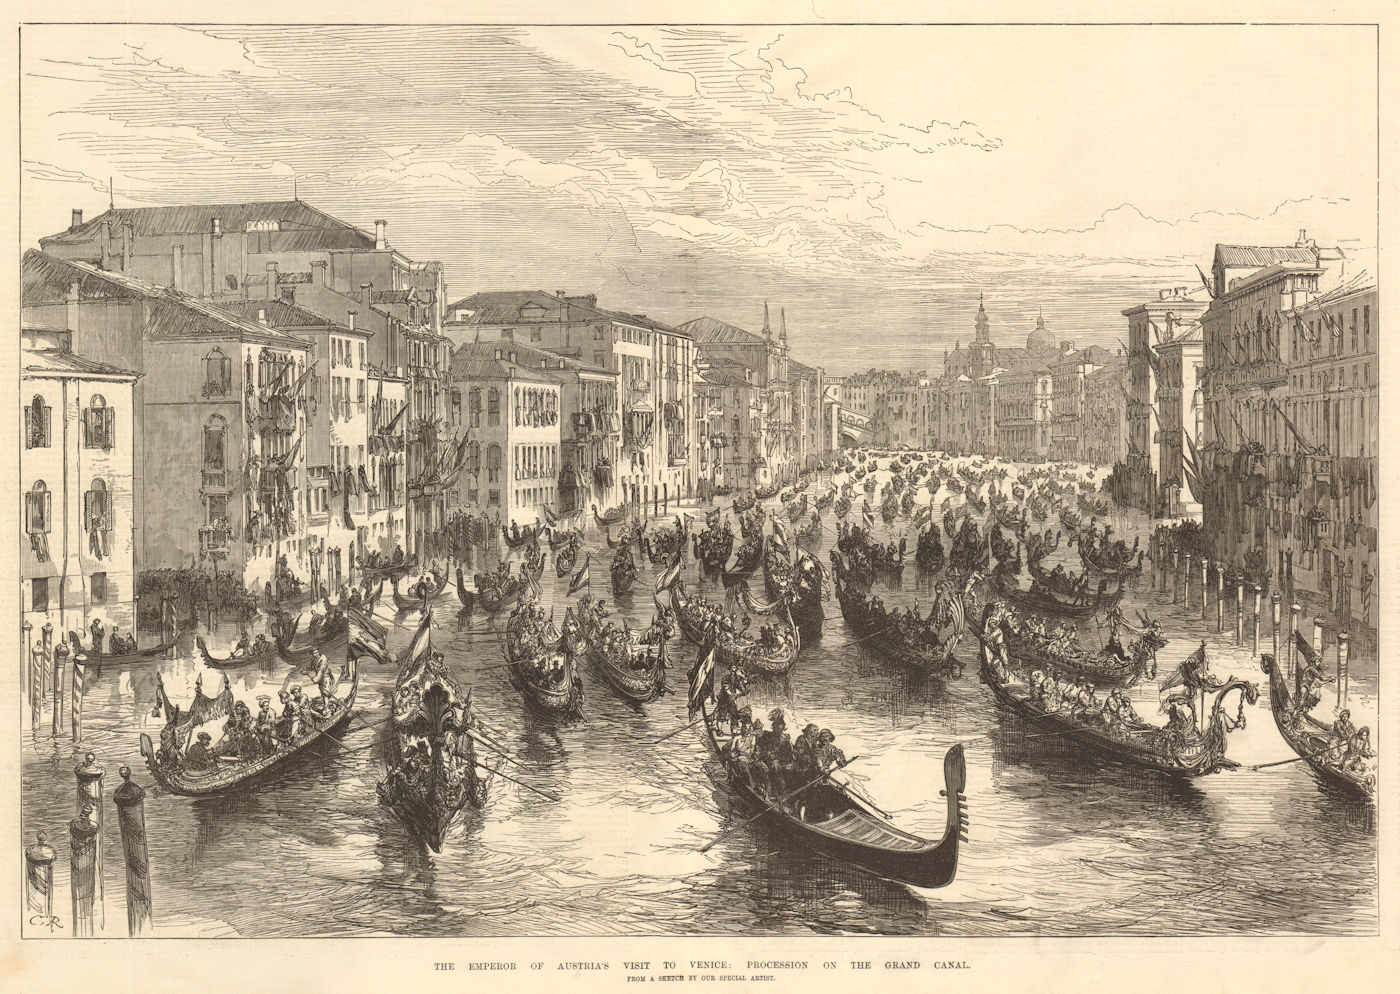 Associate Product The Emperor of Austria's visit to Venice: procession on the Grand Canal 1875